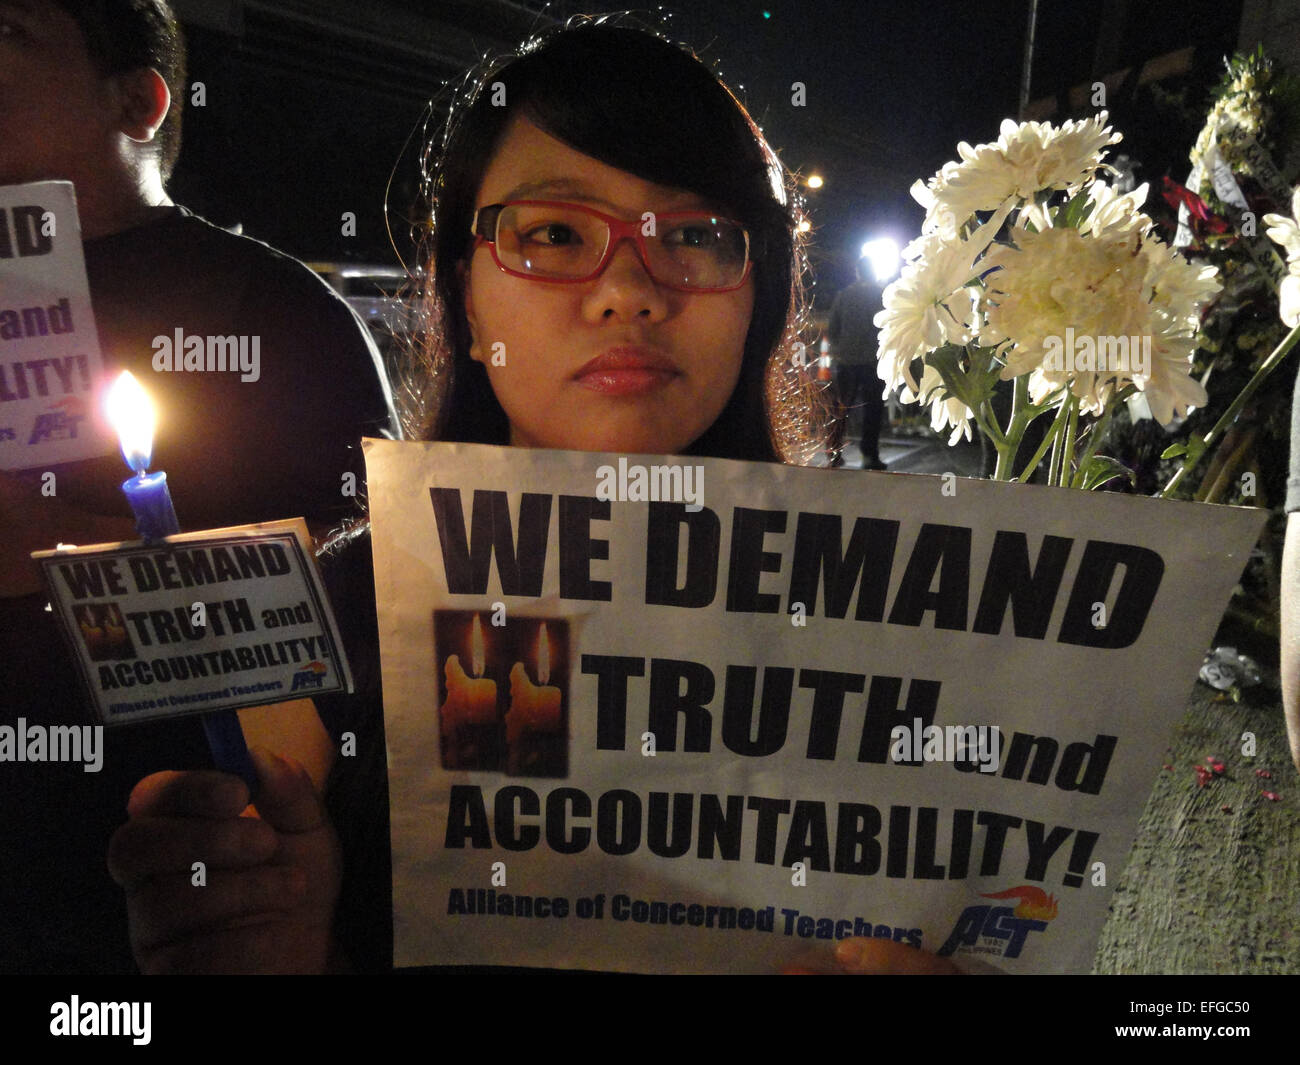 Quezon City, Philippines. 3rd Feb, 2015. An activist carries a candle, a flower, and a placard outside the Philippine National Police headquarters. A mass was celebrated outside the Philippine National Police headquarters as they called for truth and accountability for the casualties of the botched anti-terror operation in Mamasapano, Maguindanao provionce last January 25, including 44 police commandos, as well as several civilians. Credit:  Richard James Mendoza/Pacific Press/Alamy Live News Stock Photo